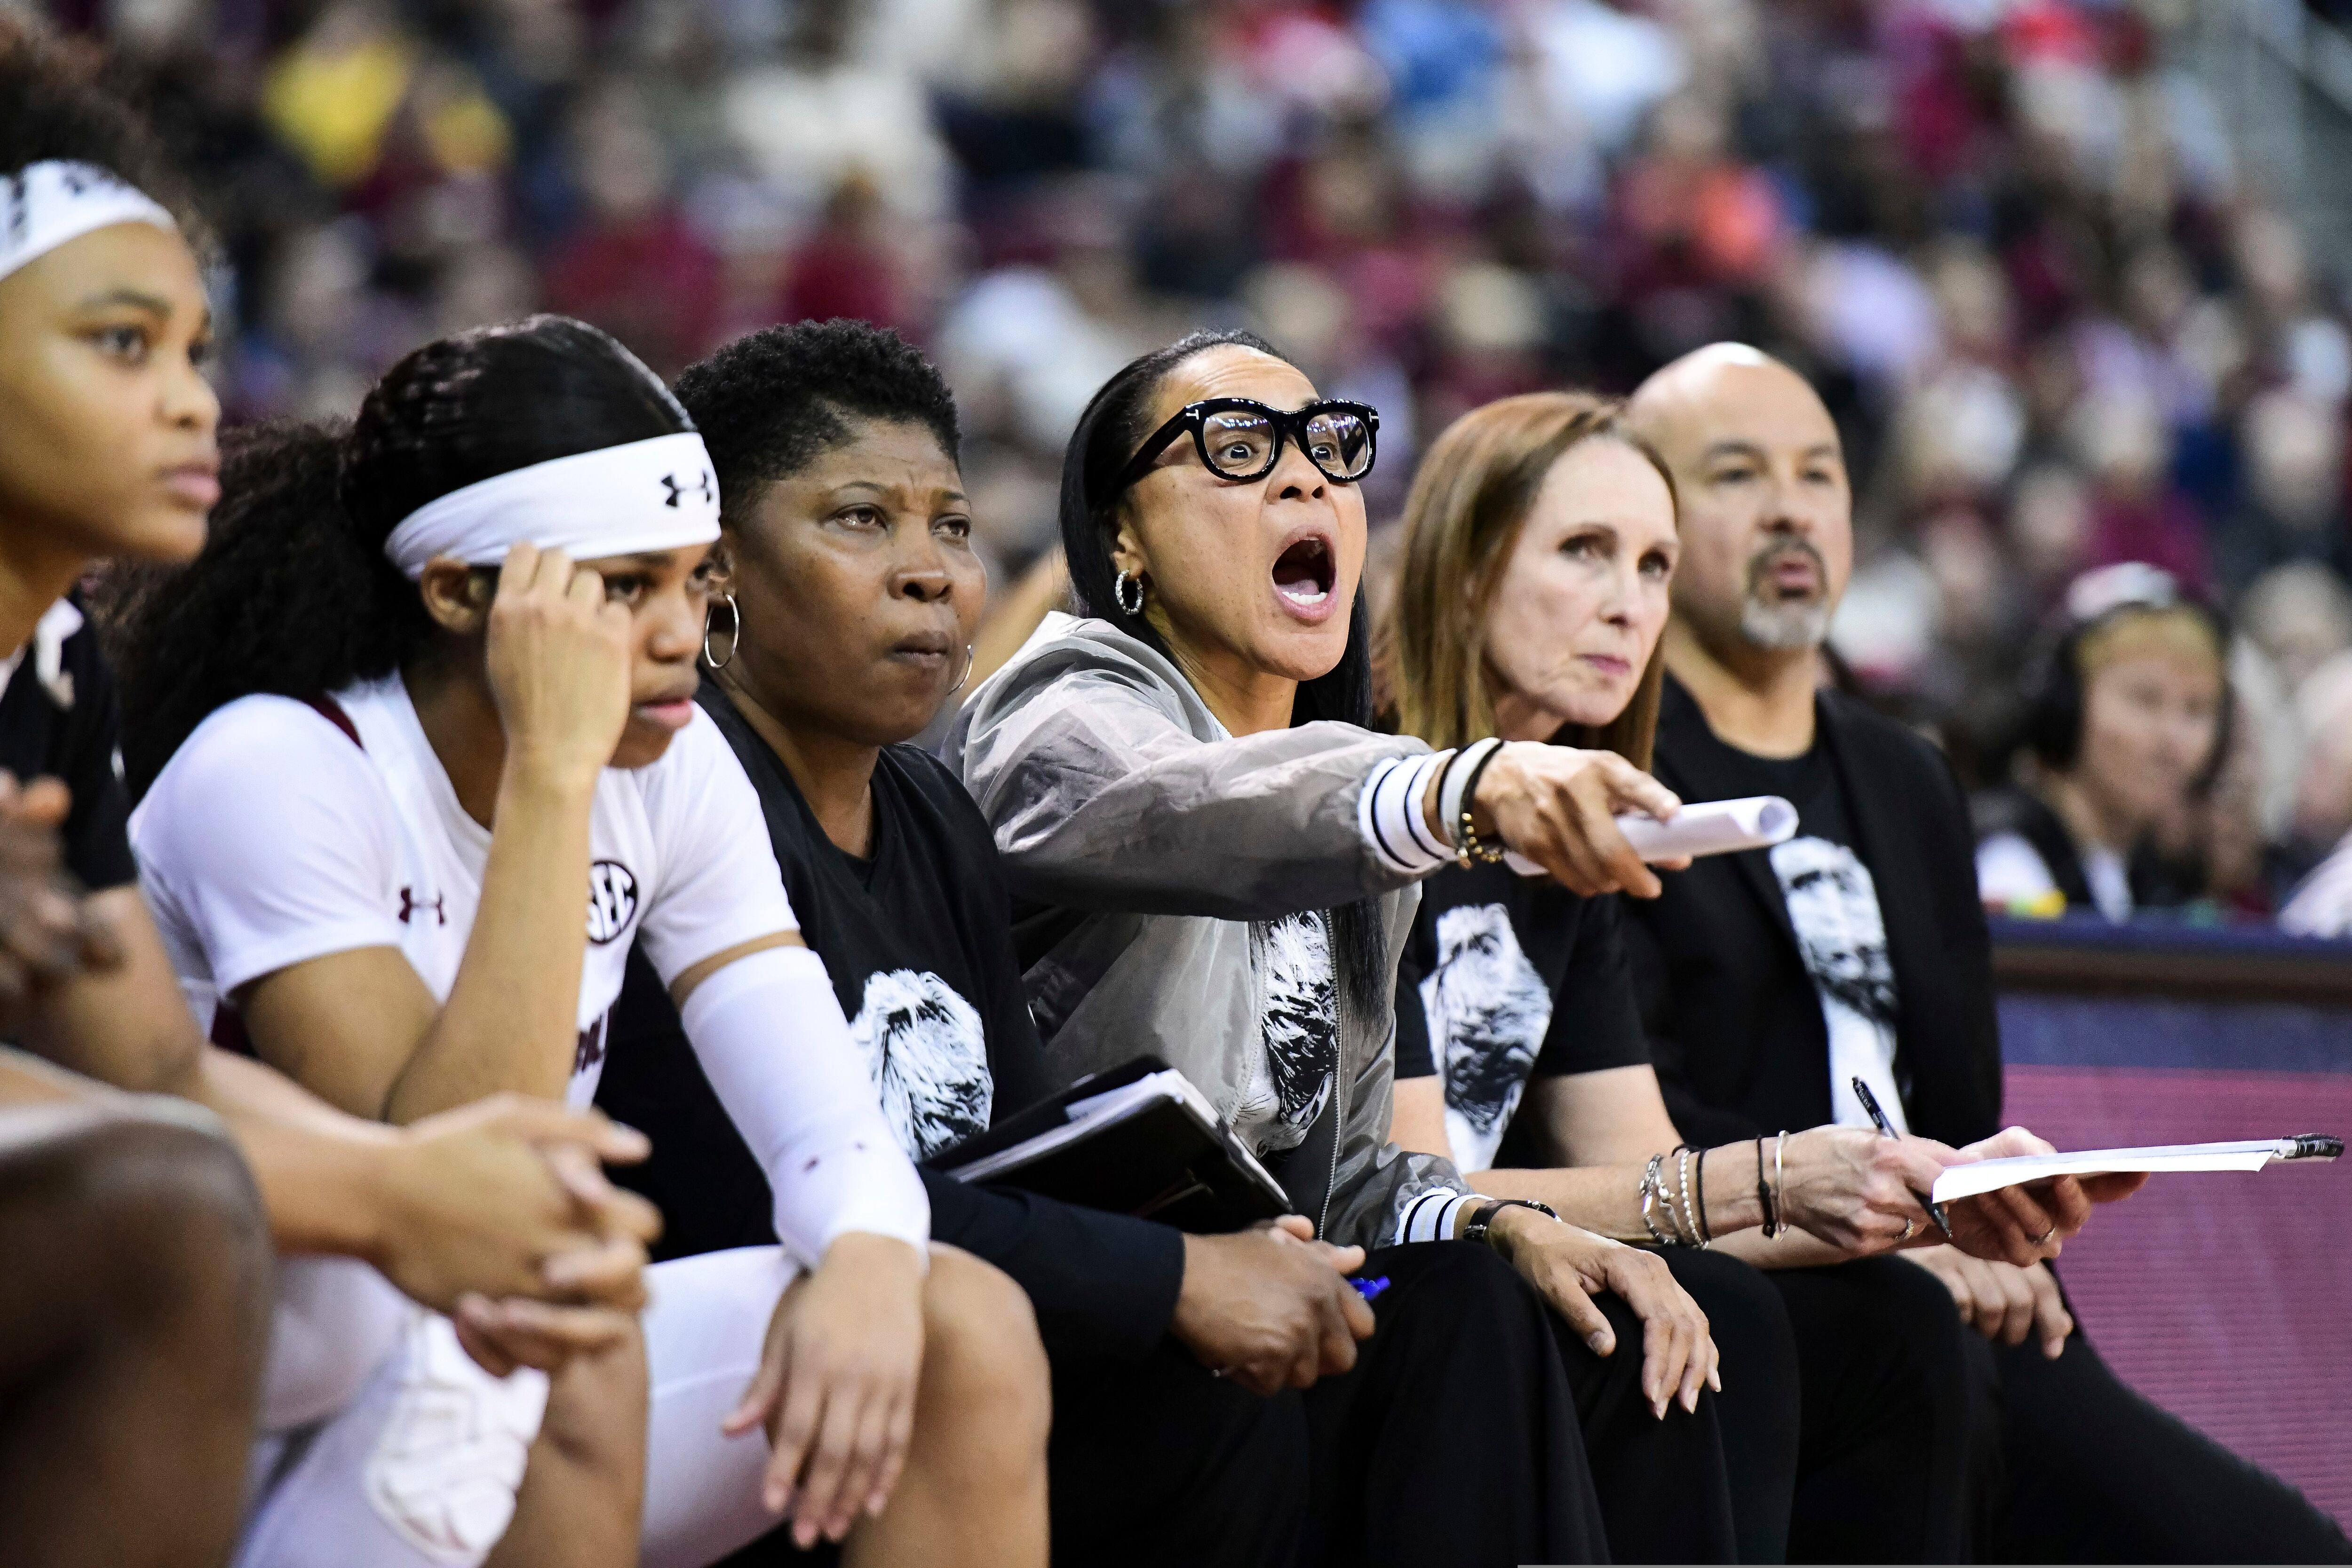 Sources: Philly's Dawn Staley To Coach US Women's Olympic Hoops Team - CBS  Philadelphia